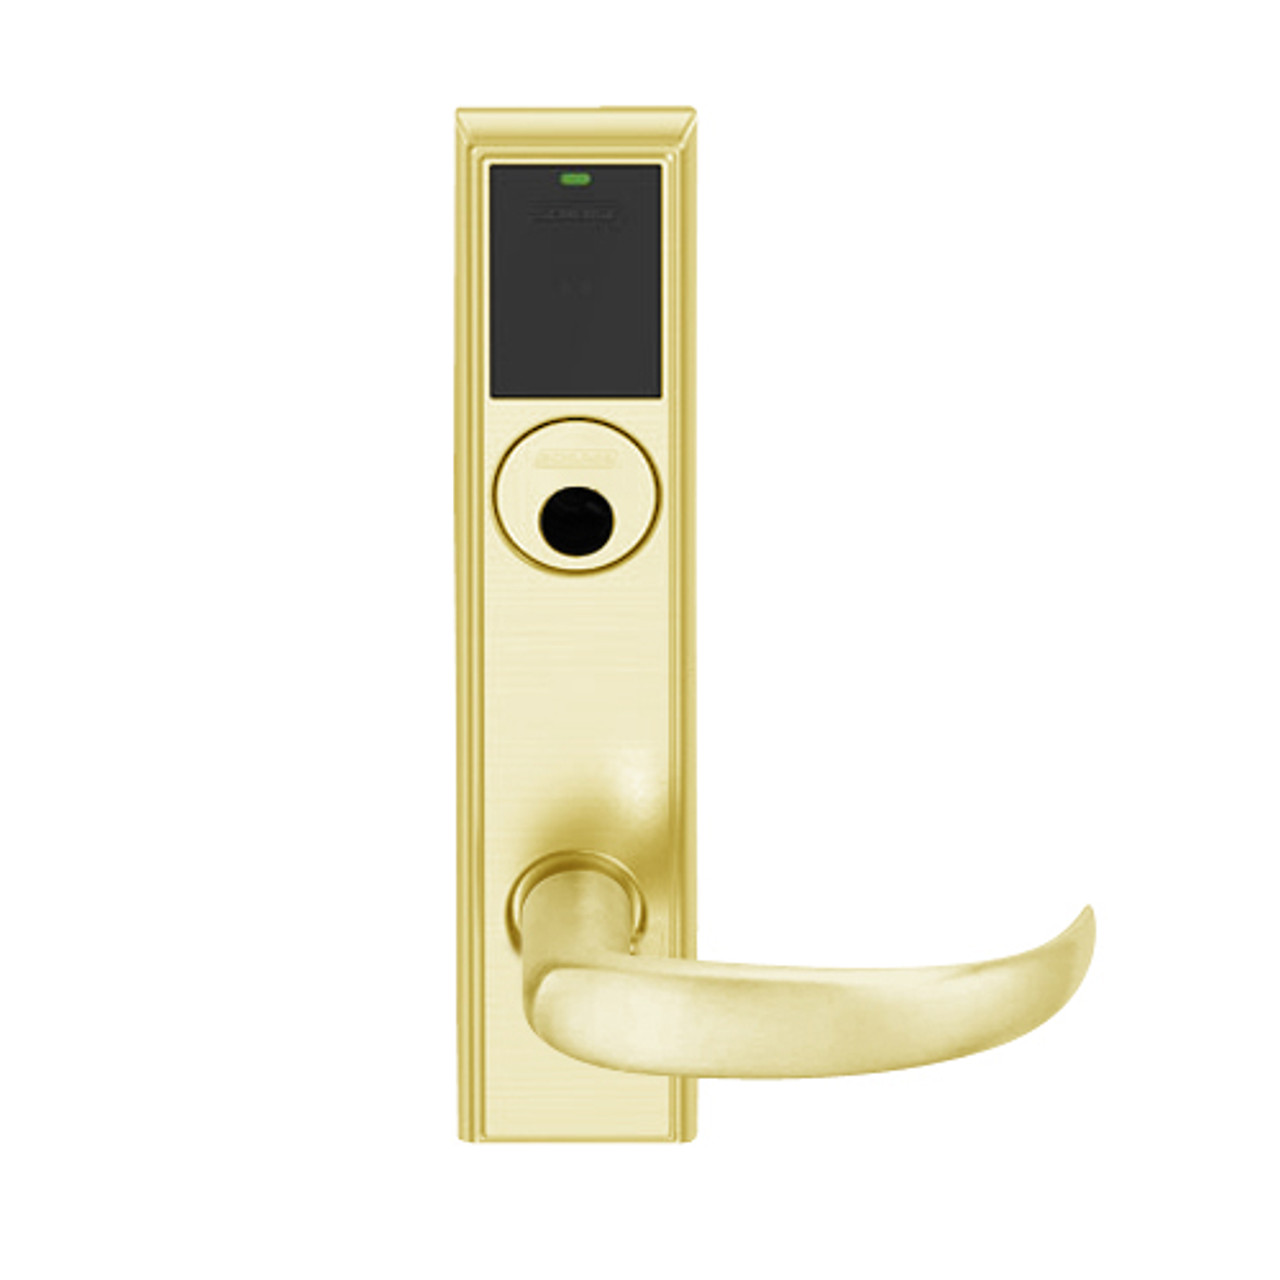 LEMD-ADD-L-17-605 Schlage Less Mortise Cylinder Privacy/Apartment Wireless Addison Mortise Deadbolt Lock with LED and Sparta Lever in Bright Brass